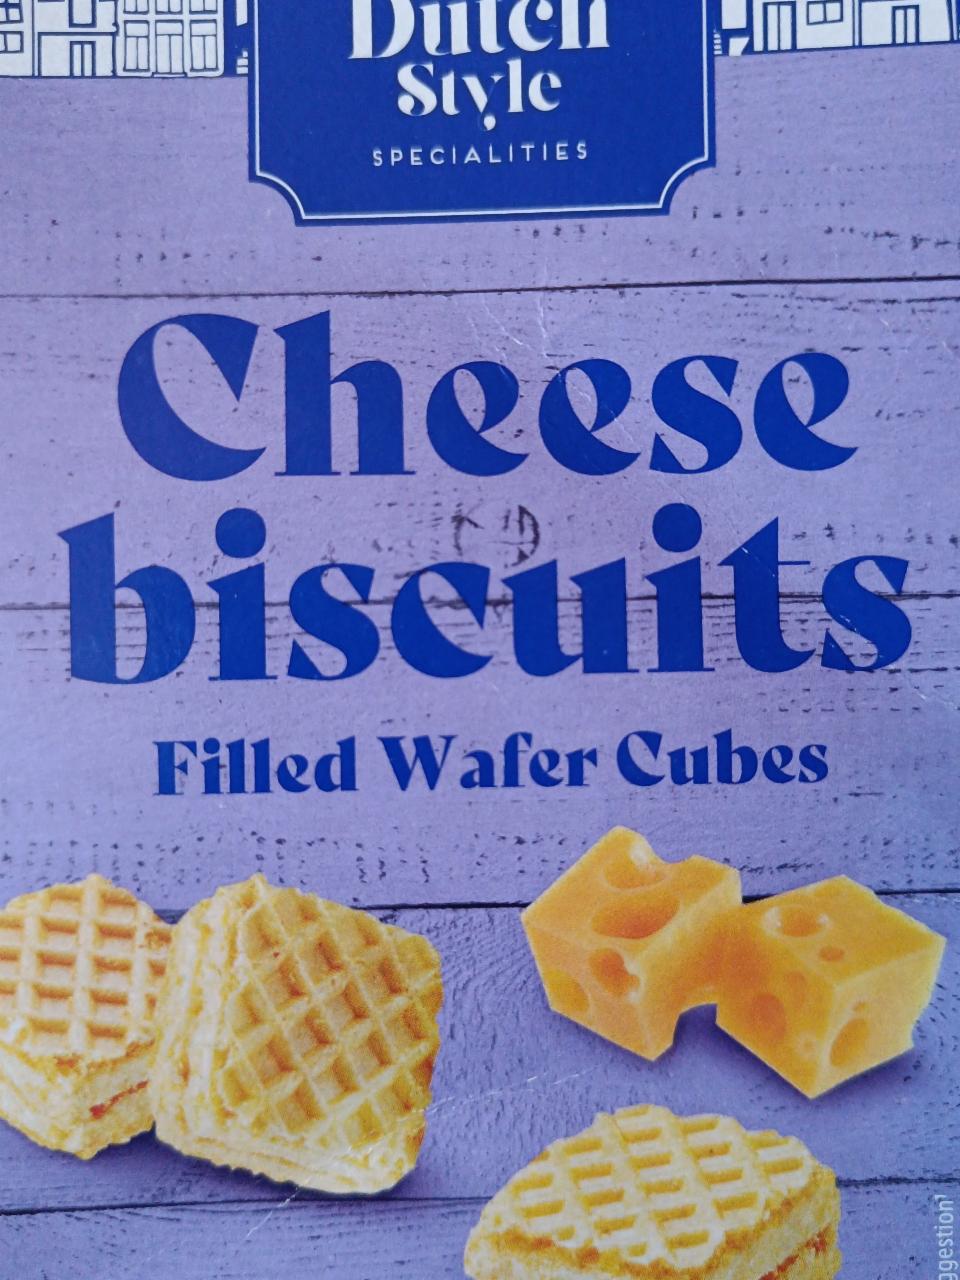 Fotografie - Cheese biscuits filled wafer cubes